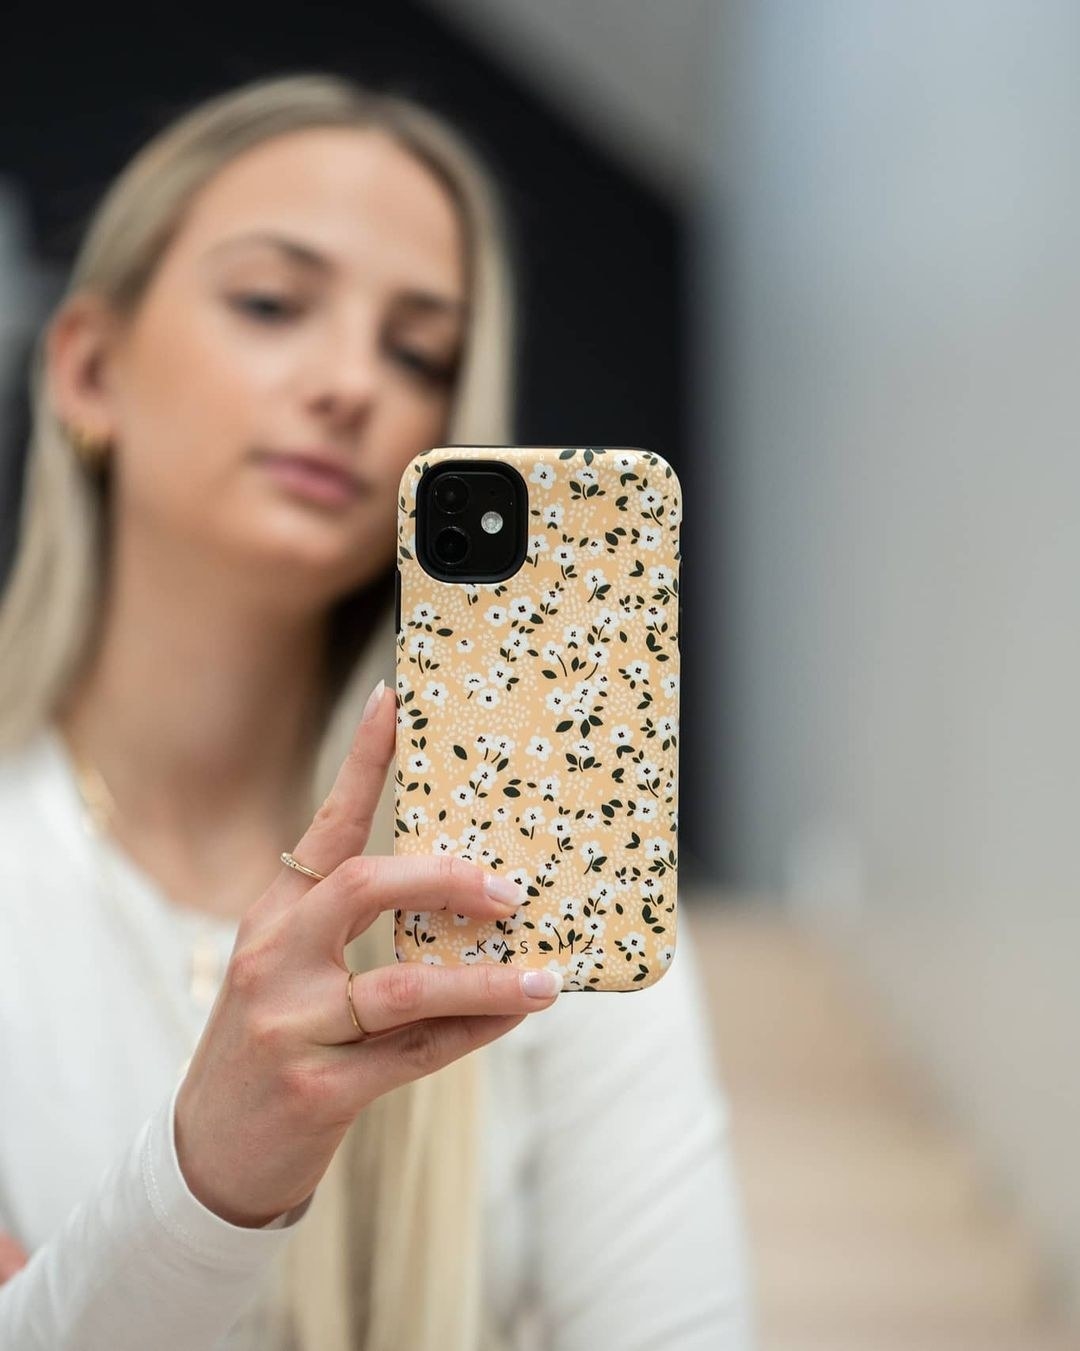 A person holding a phone with with a hard case that has a floral illustration on it